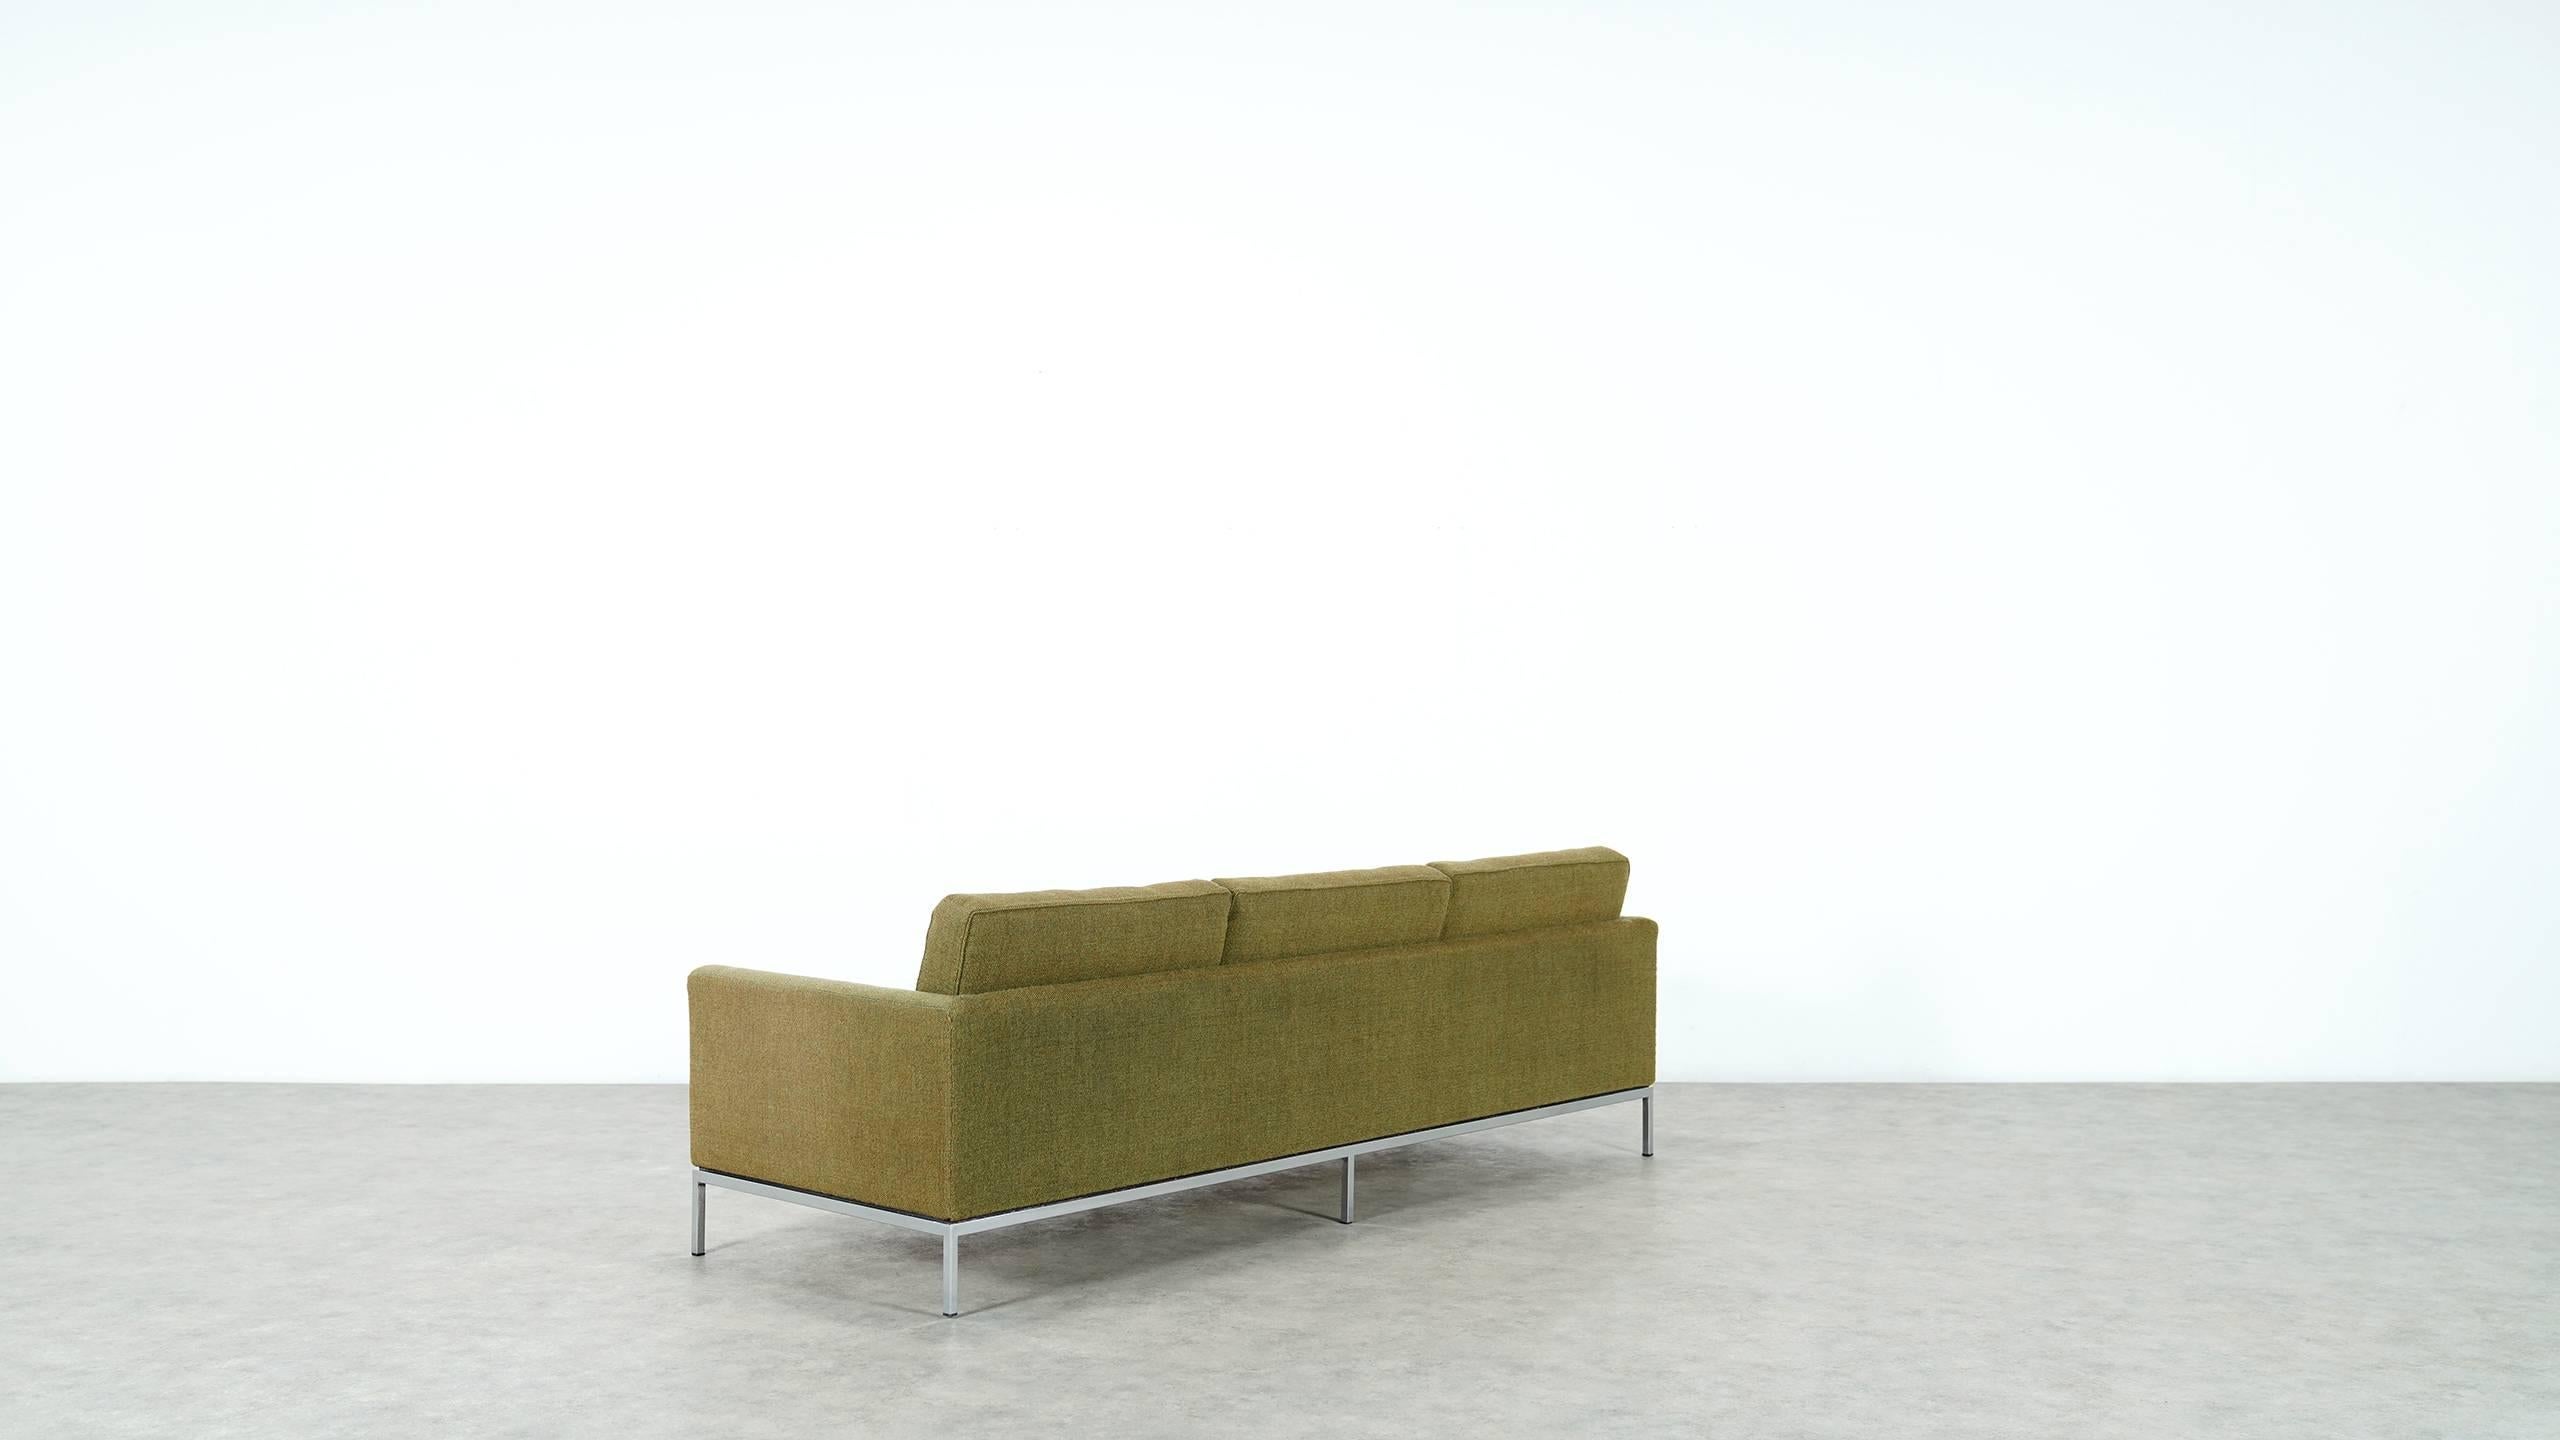 Fabric Florence Knoll, Sofa and Lounge Chair, 1954 for Knoll International, in Kvadrat